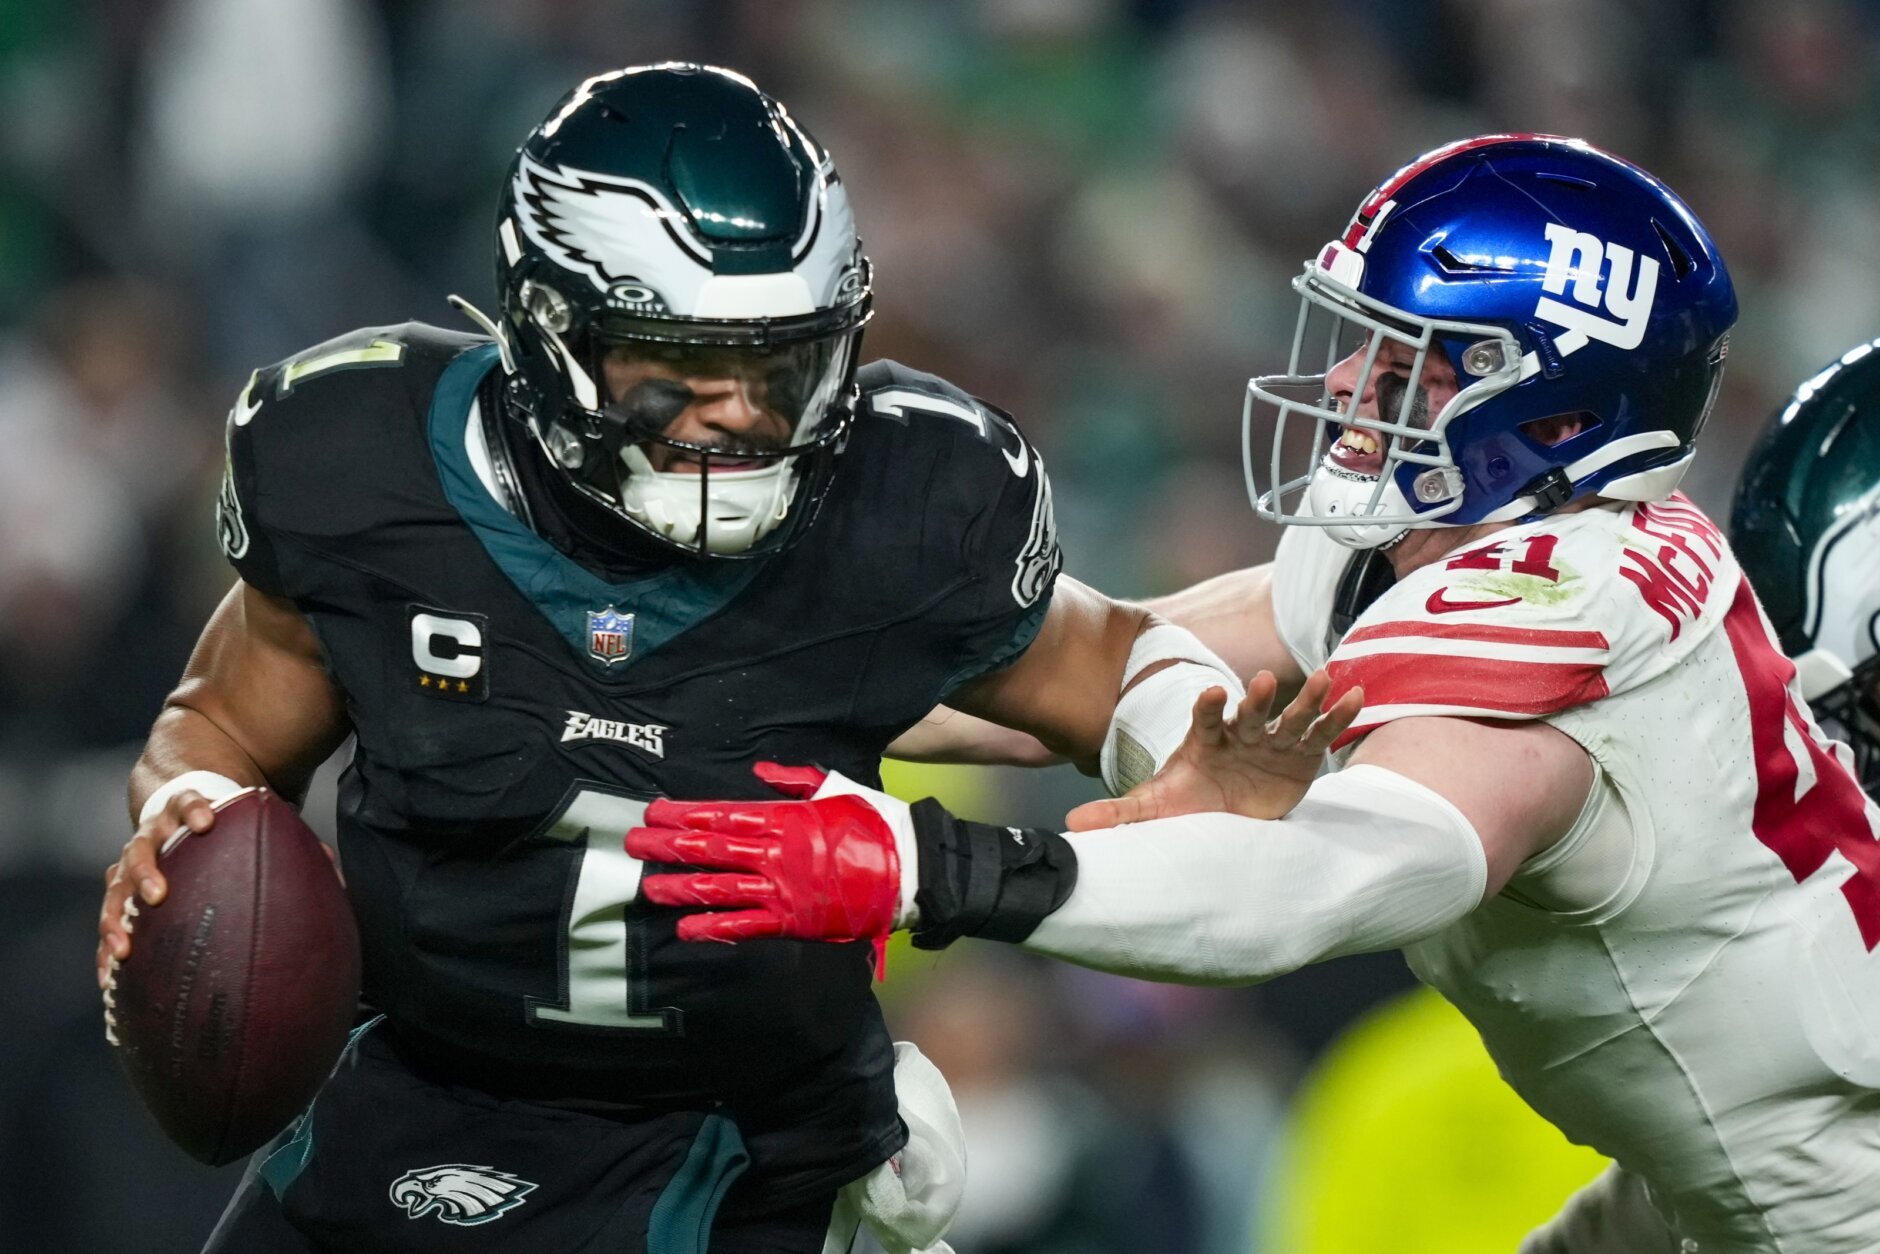 Column: Defense wins championships, so take the Eagles in Sunday's